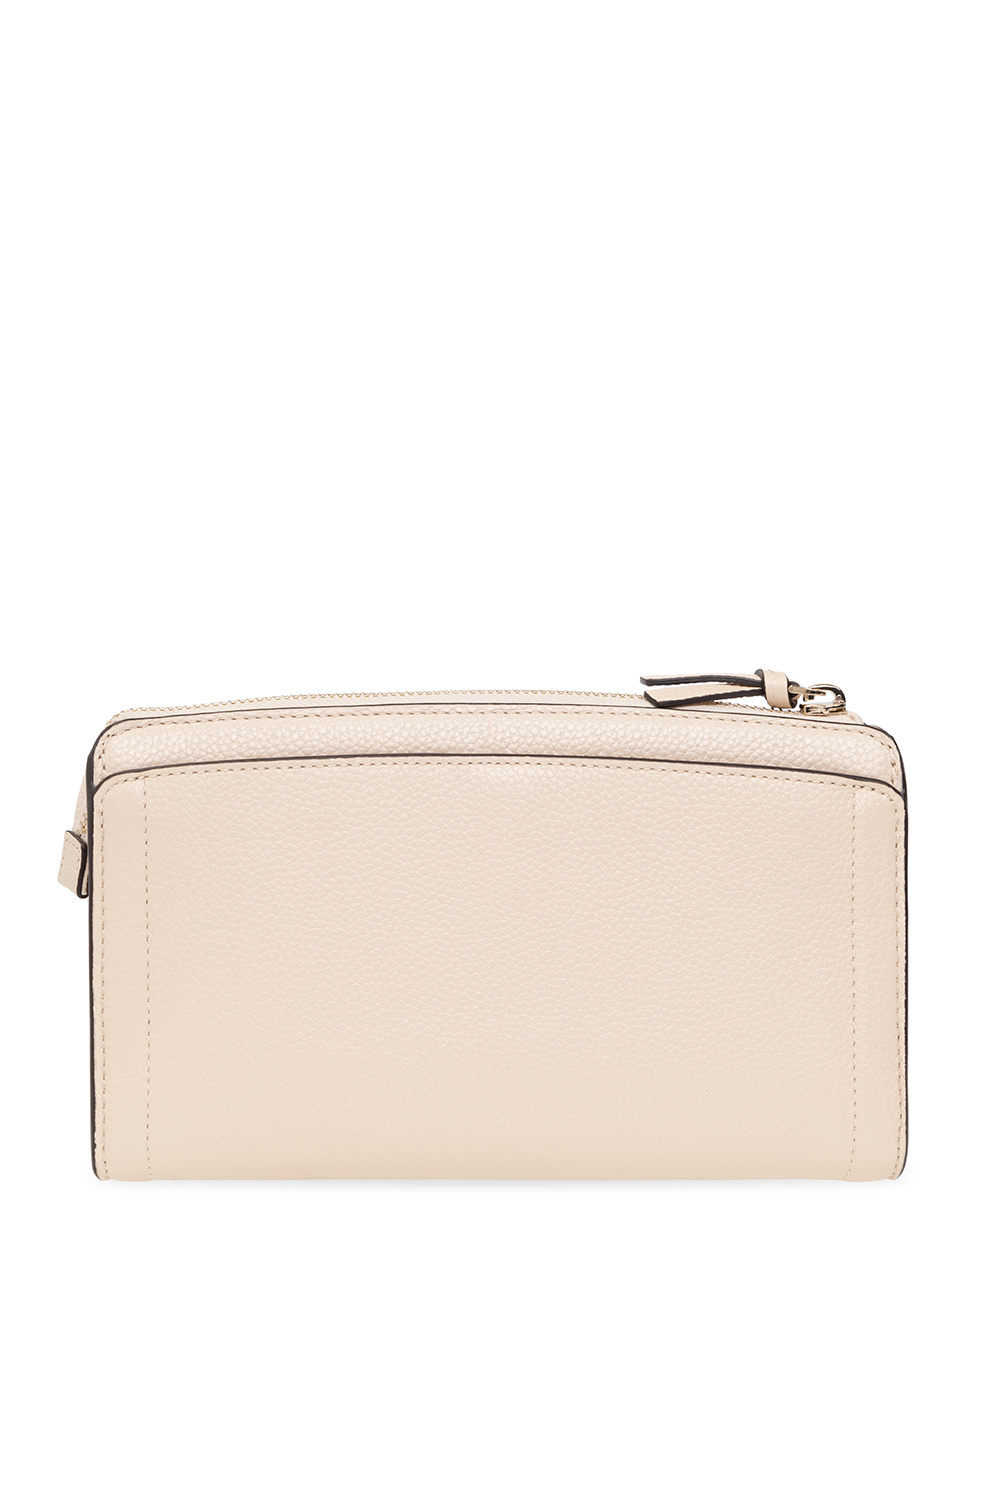 Kate Spade ‘Knott Small’ shoulder another bag